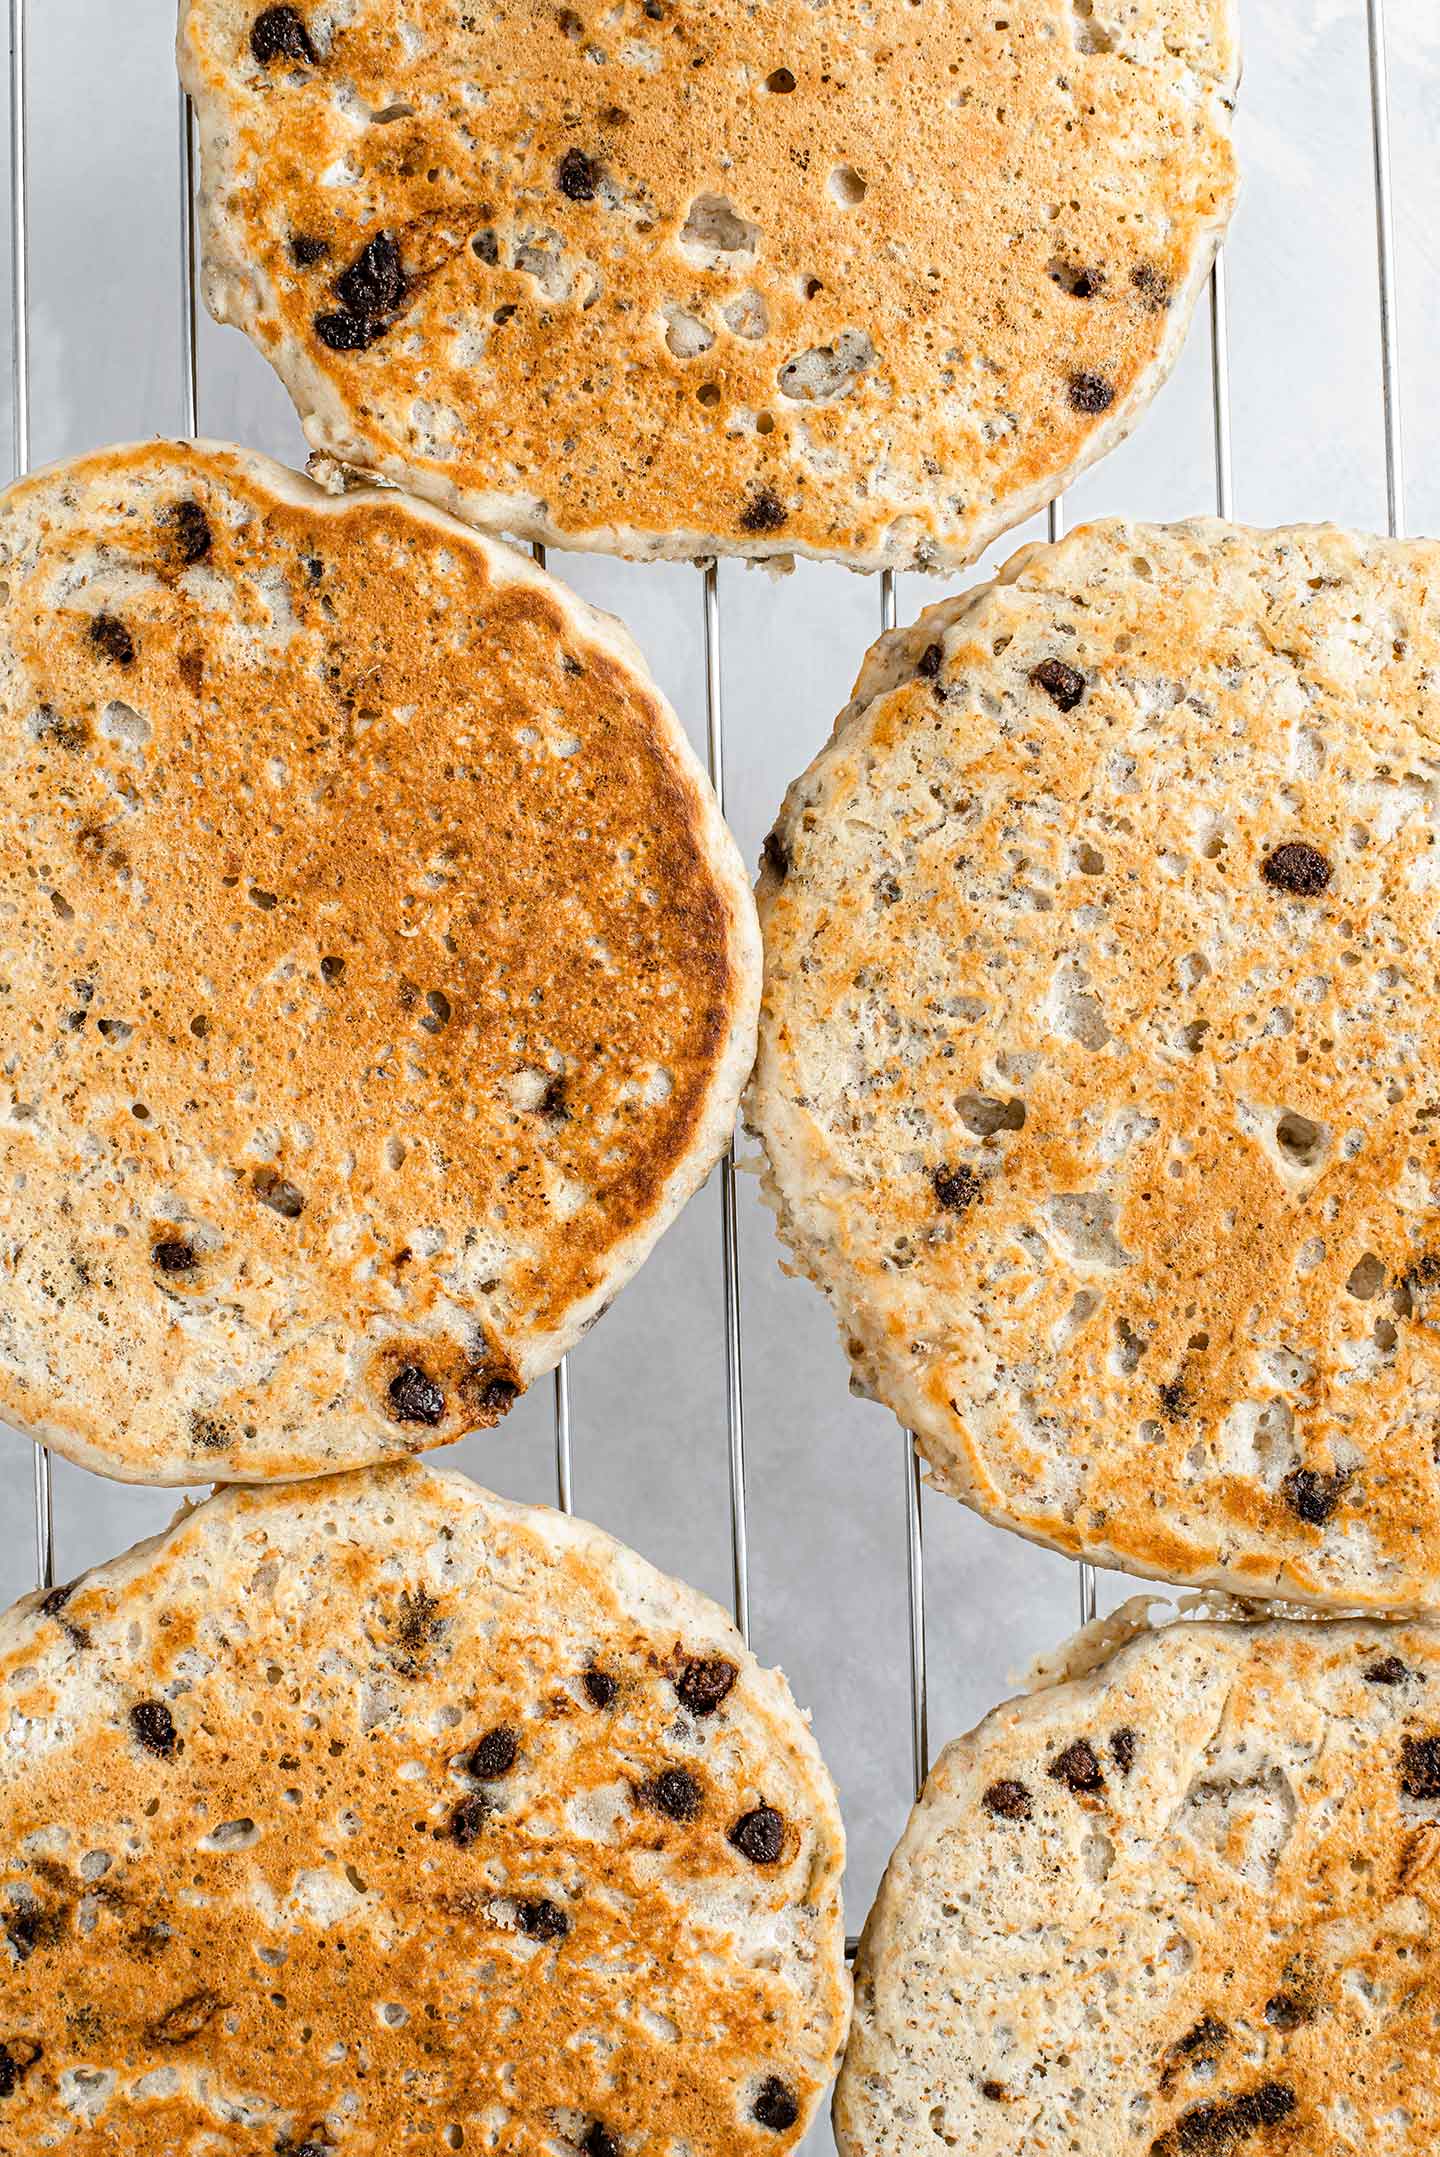 Cooked chia chip pancakes cool on a wire rack. They are golden brown and the chips are melty.